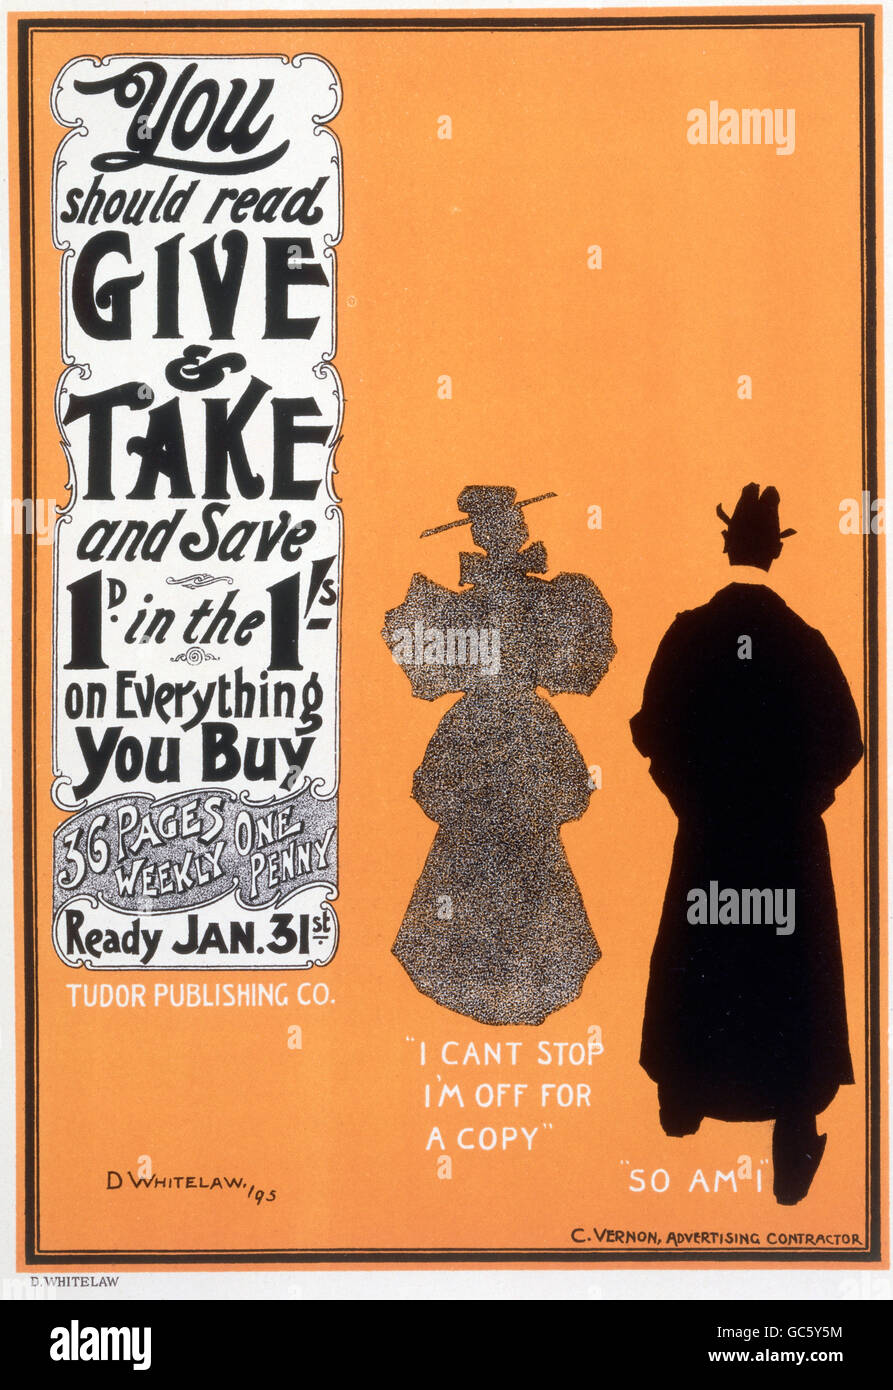 press / media, magazines, 'Give and Take', advertising poster by David Whitelaw (1875 - 1970), 1895, from 'The modern poster', by Jean Louis Sponsel, 1897, Additional-Rights-Clearences-Not Available Stock Photo